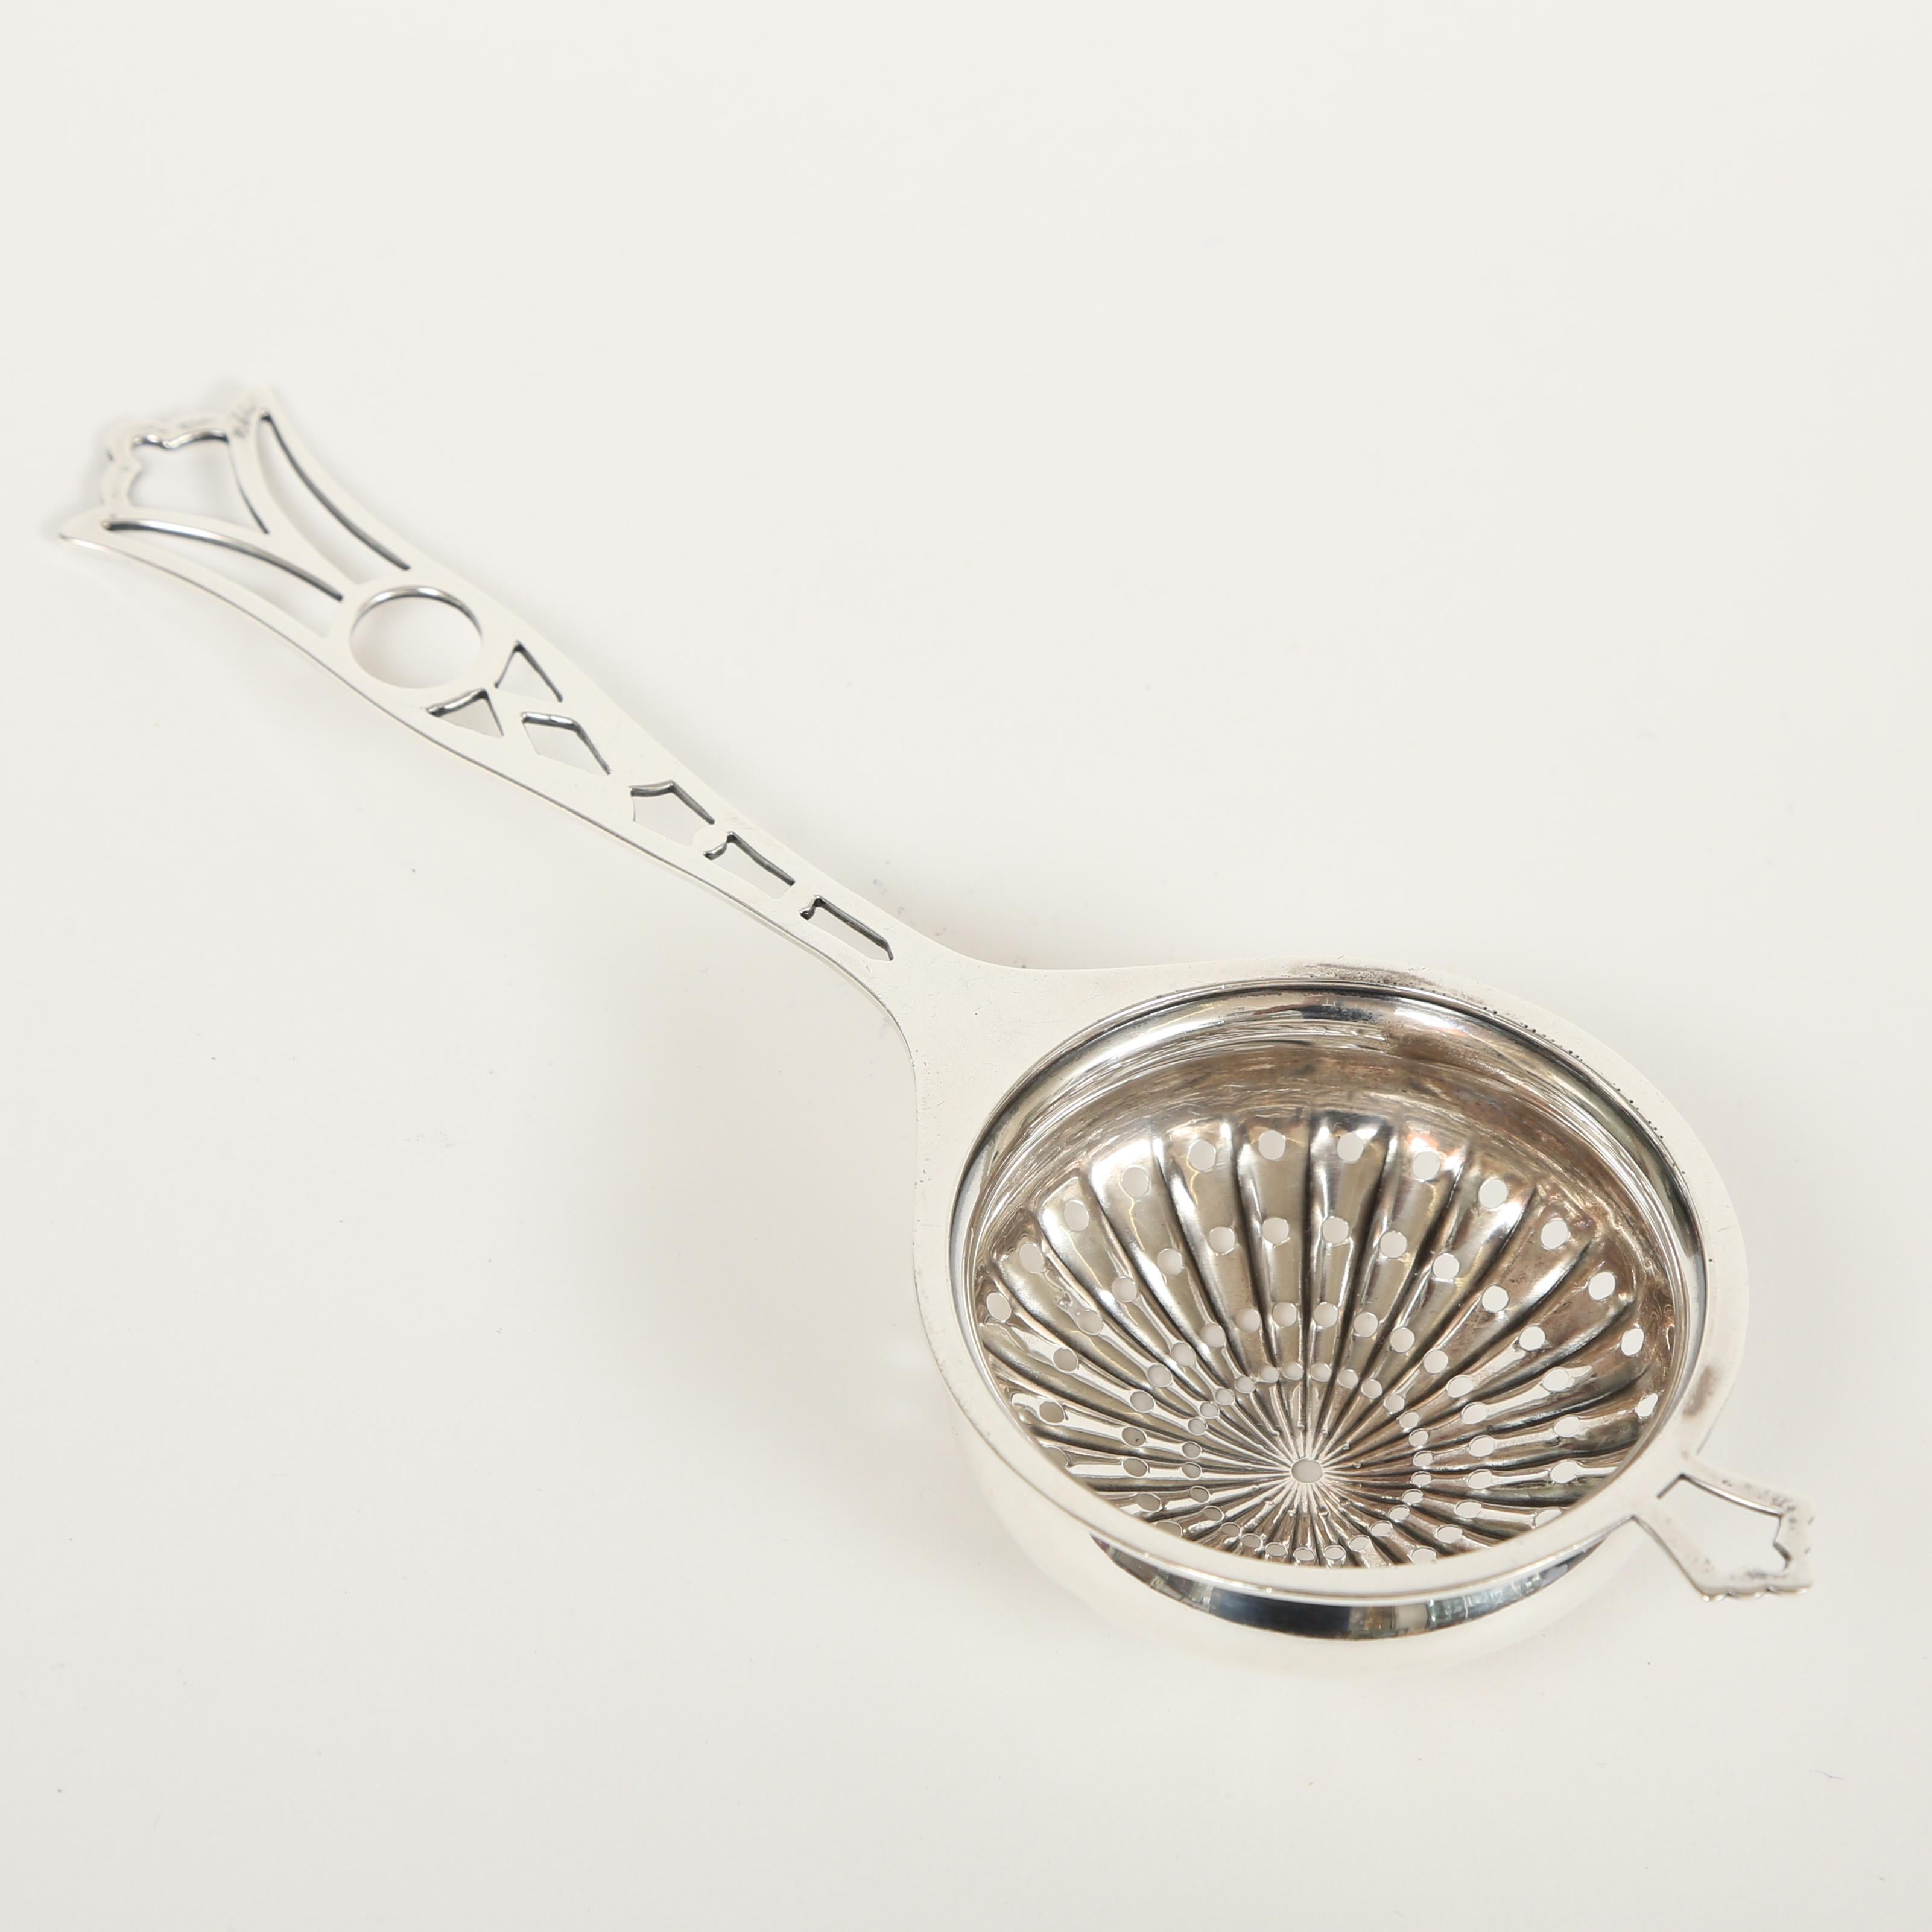 American Sterling Silver Tea Strainer by Webster & Co.